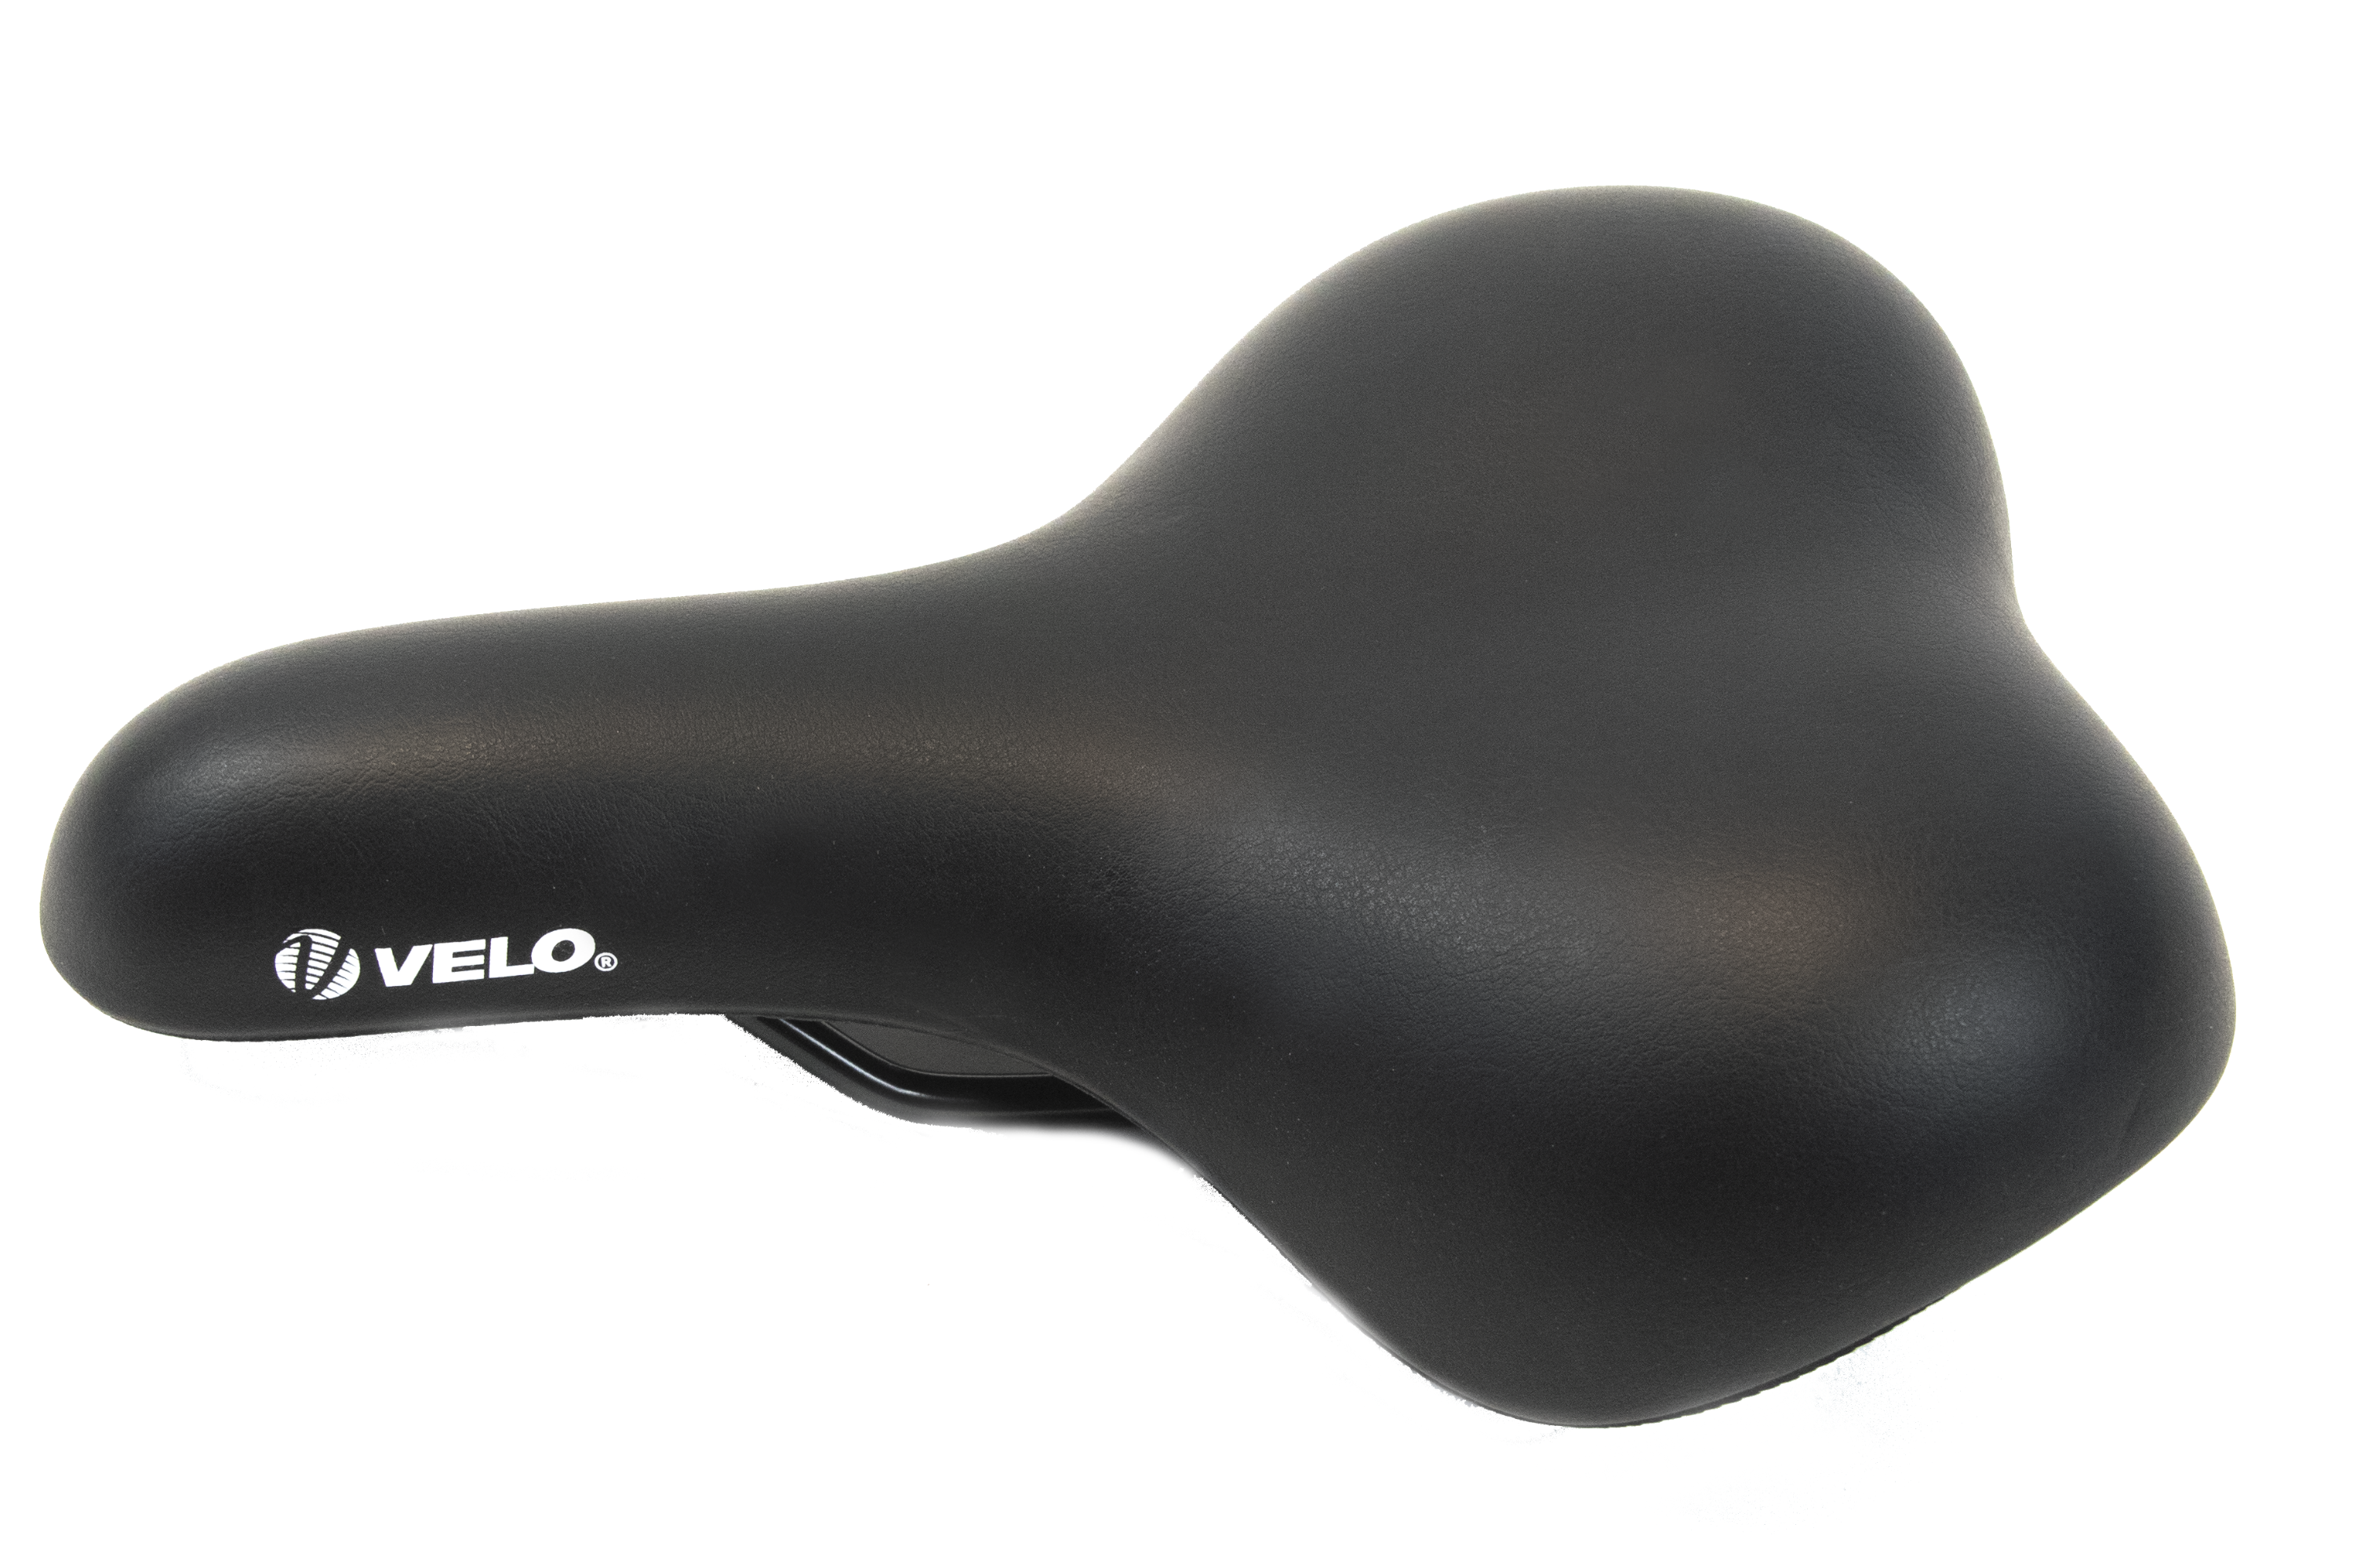 euphree city robin velo saddle replacement in the color black.